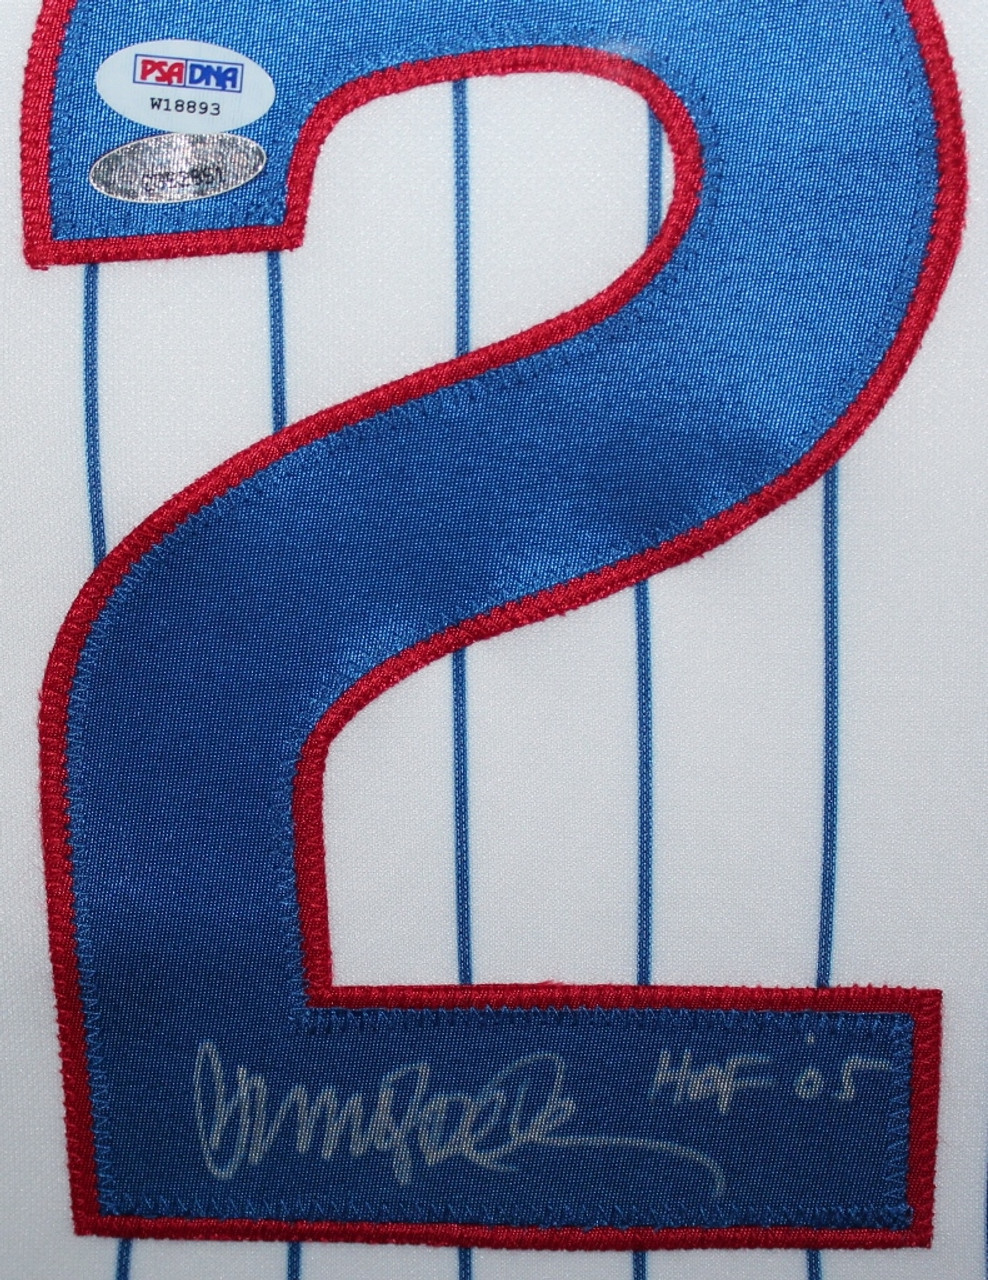 Ryne Sandberg Autographed and Framed Pinstriped Cubs Jersey